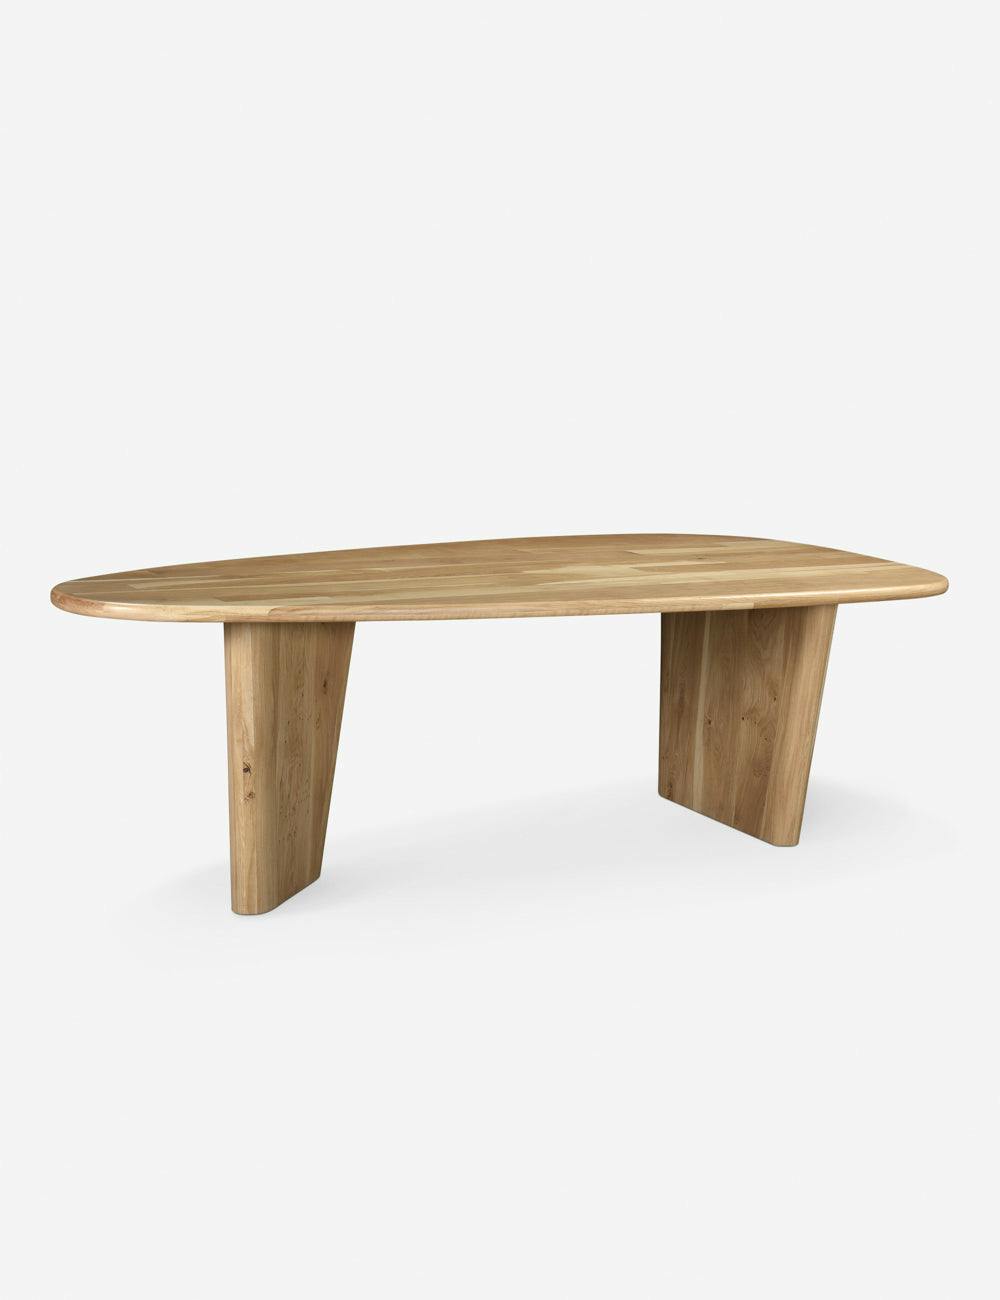 Saratoga Round Natural White Oak Dining Table for Six